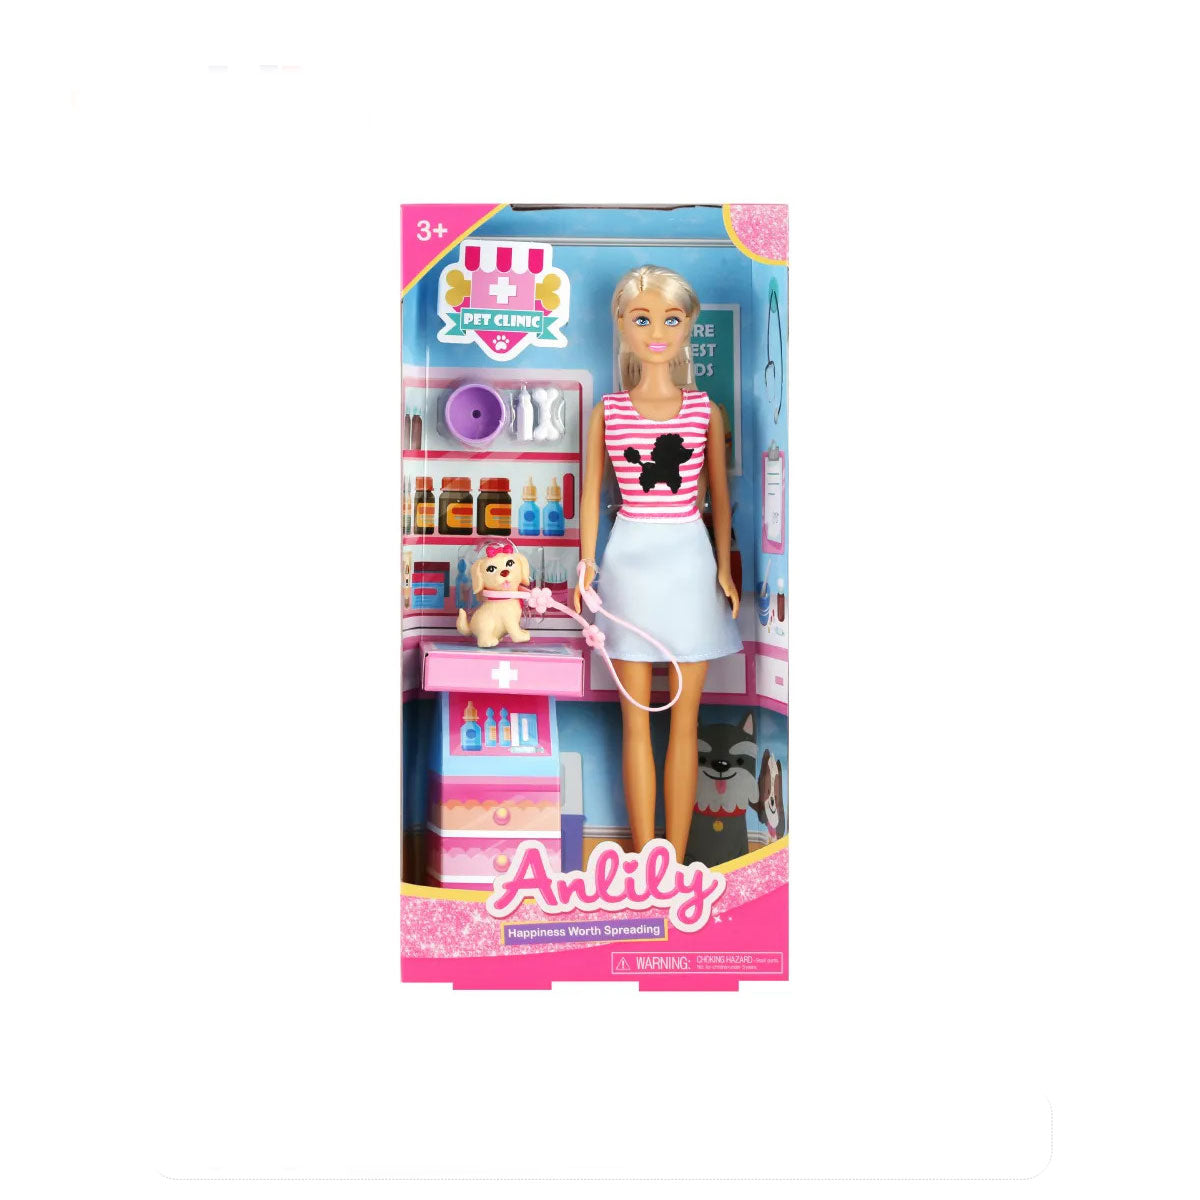 Anlily Pet Clinic Playset (99069)